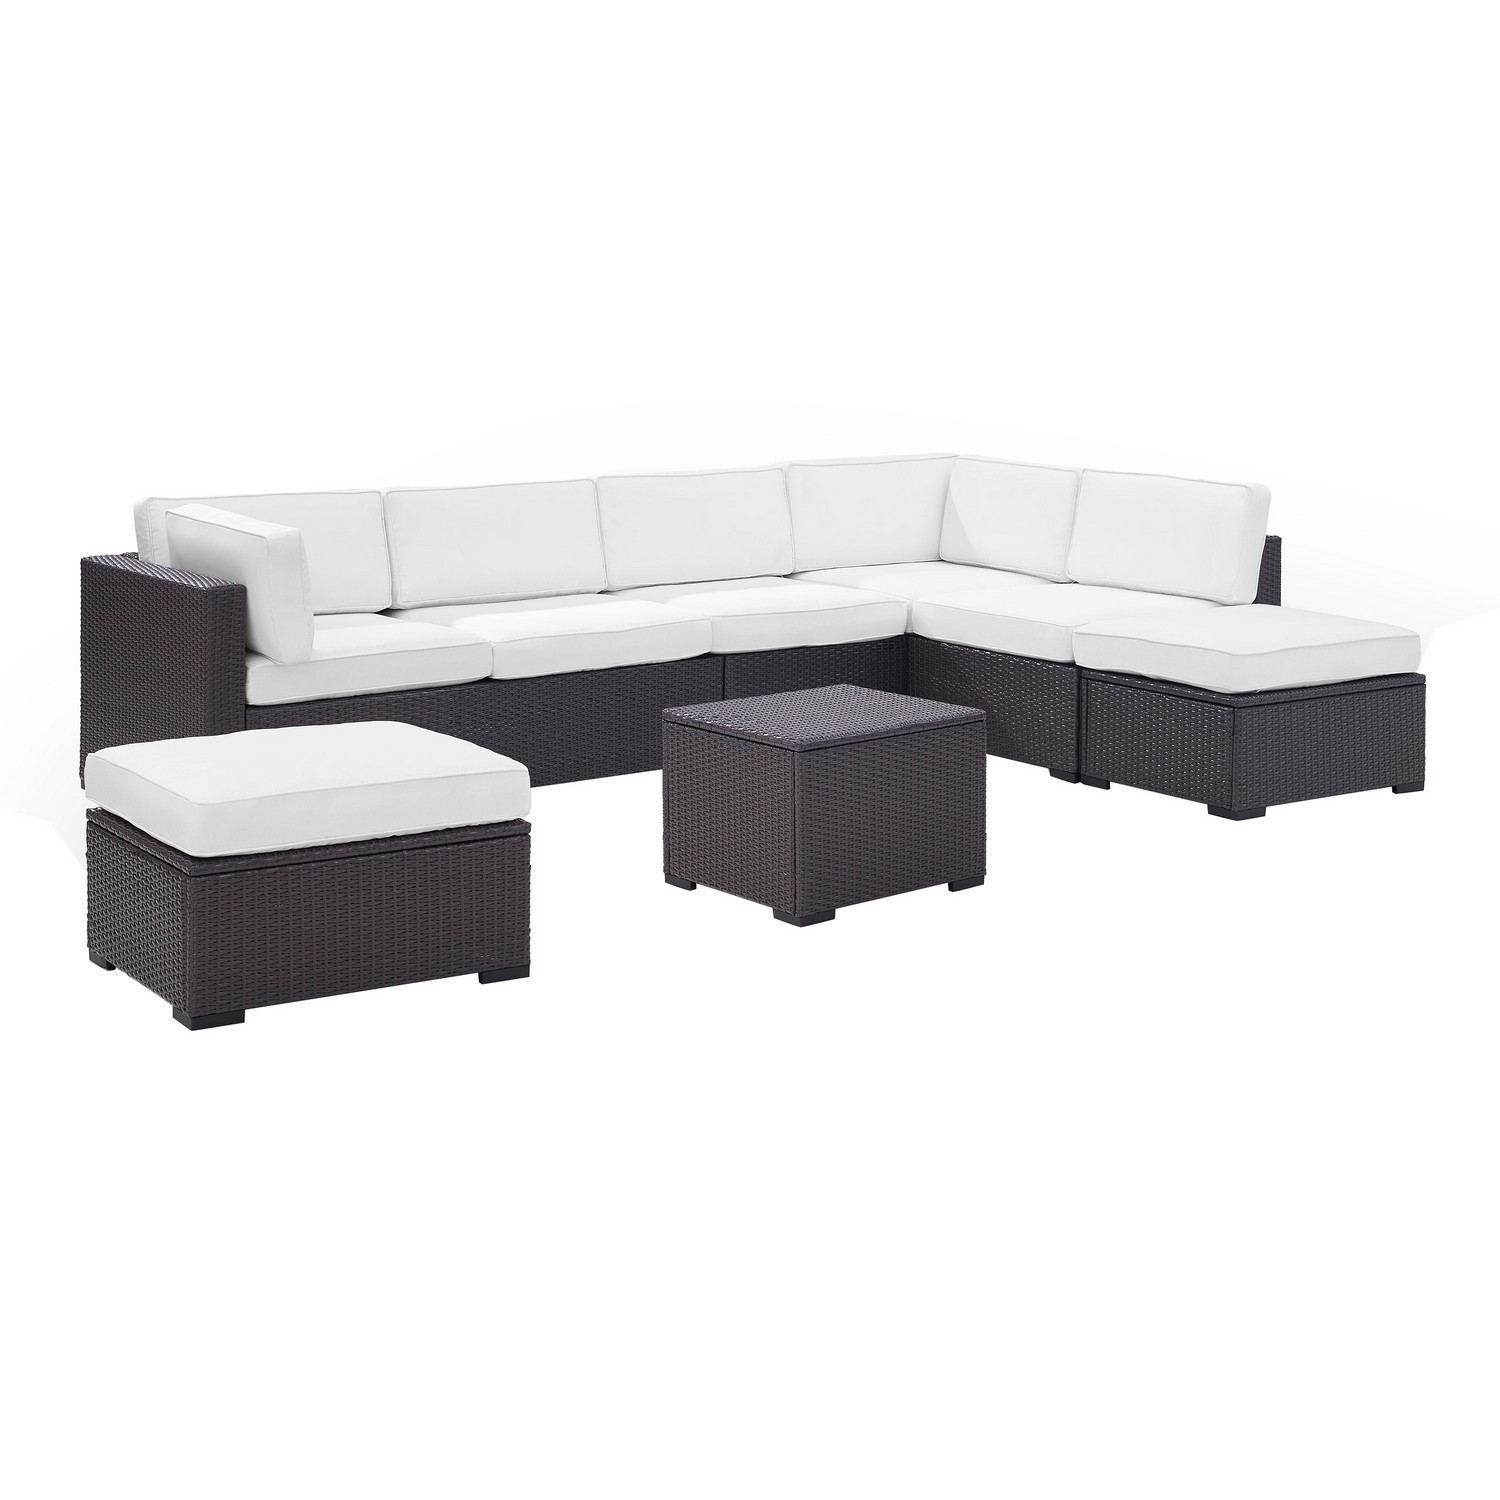 Crosley Biscayne 6-PC Outdoor Wicker Sectional Set - 2 Loveseats, Armless Chair, Coffee Table, 2 Ottomans - White/Brown